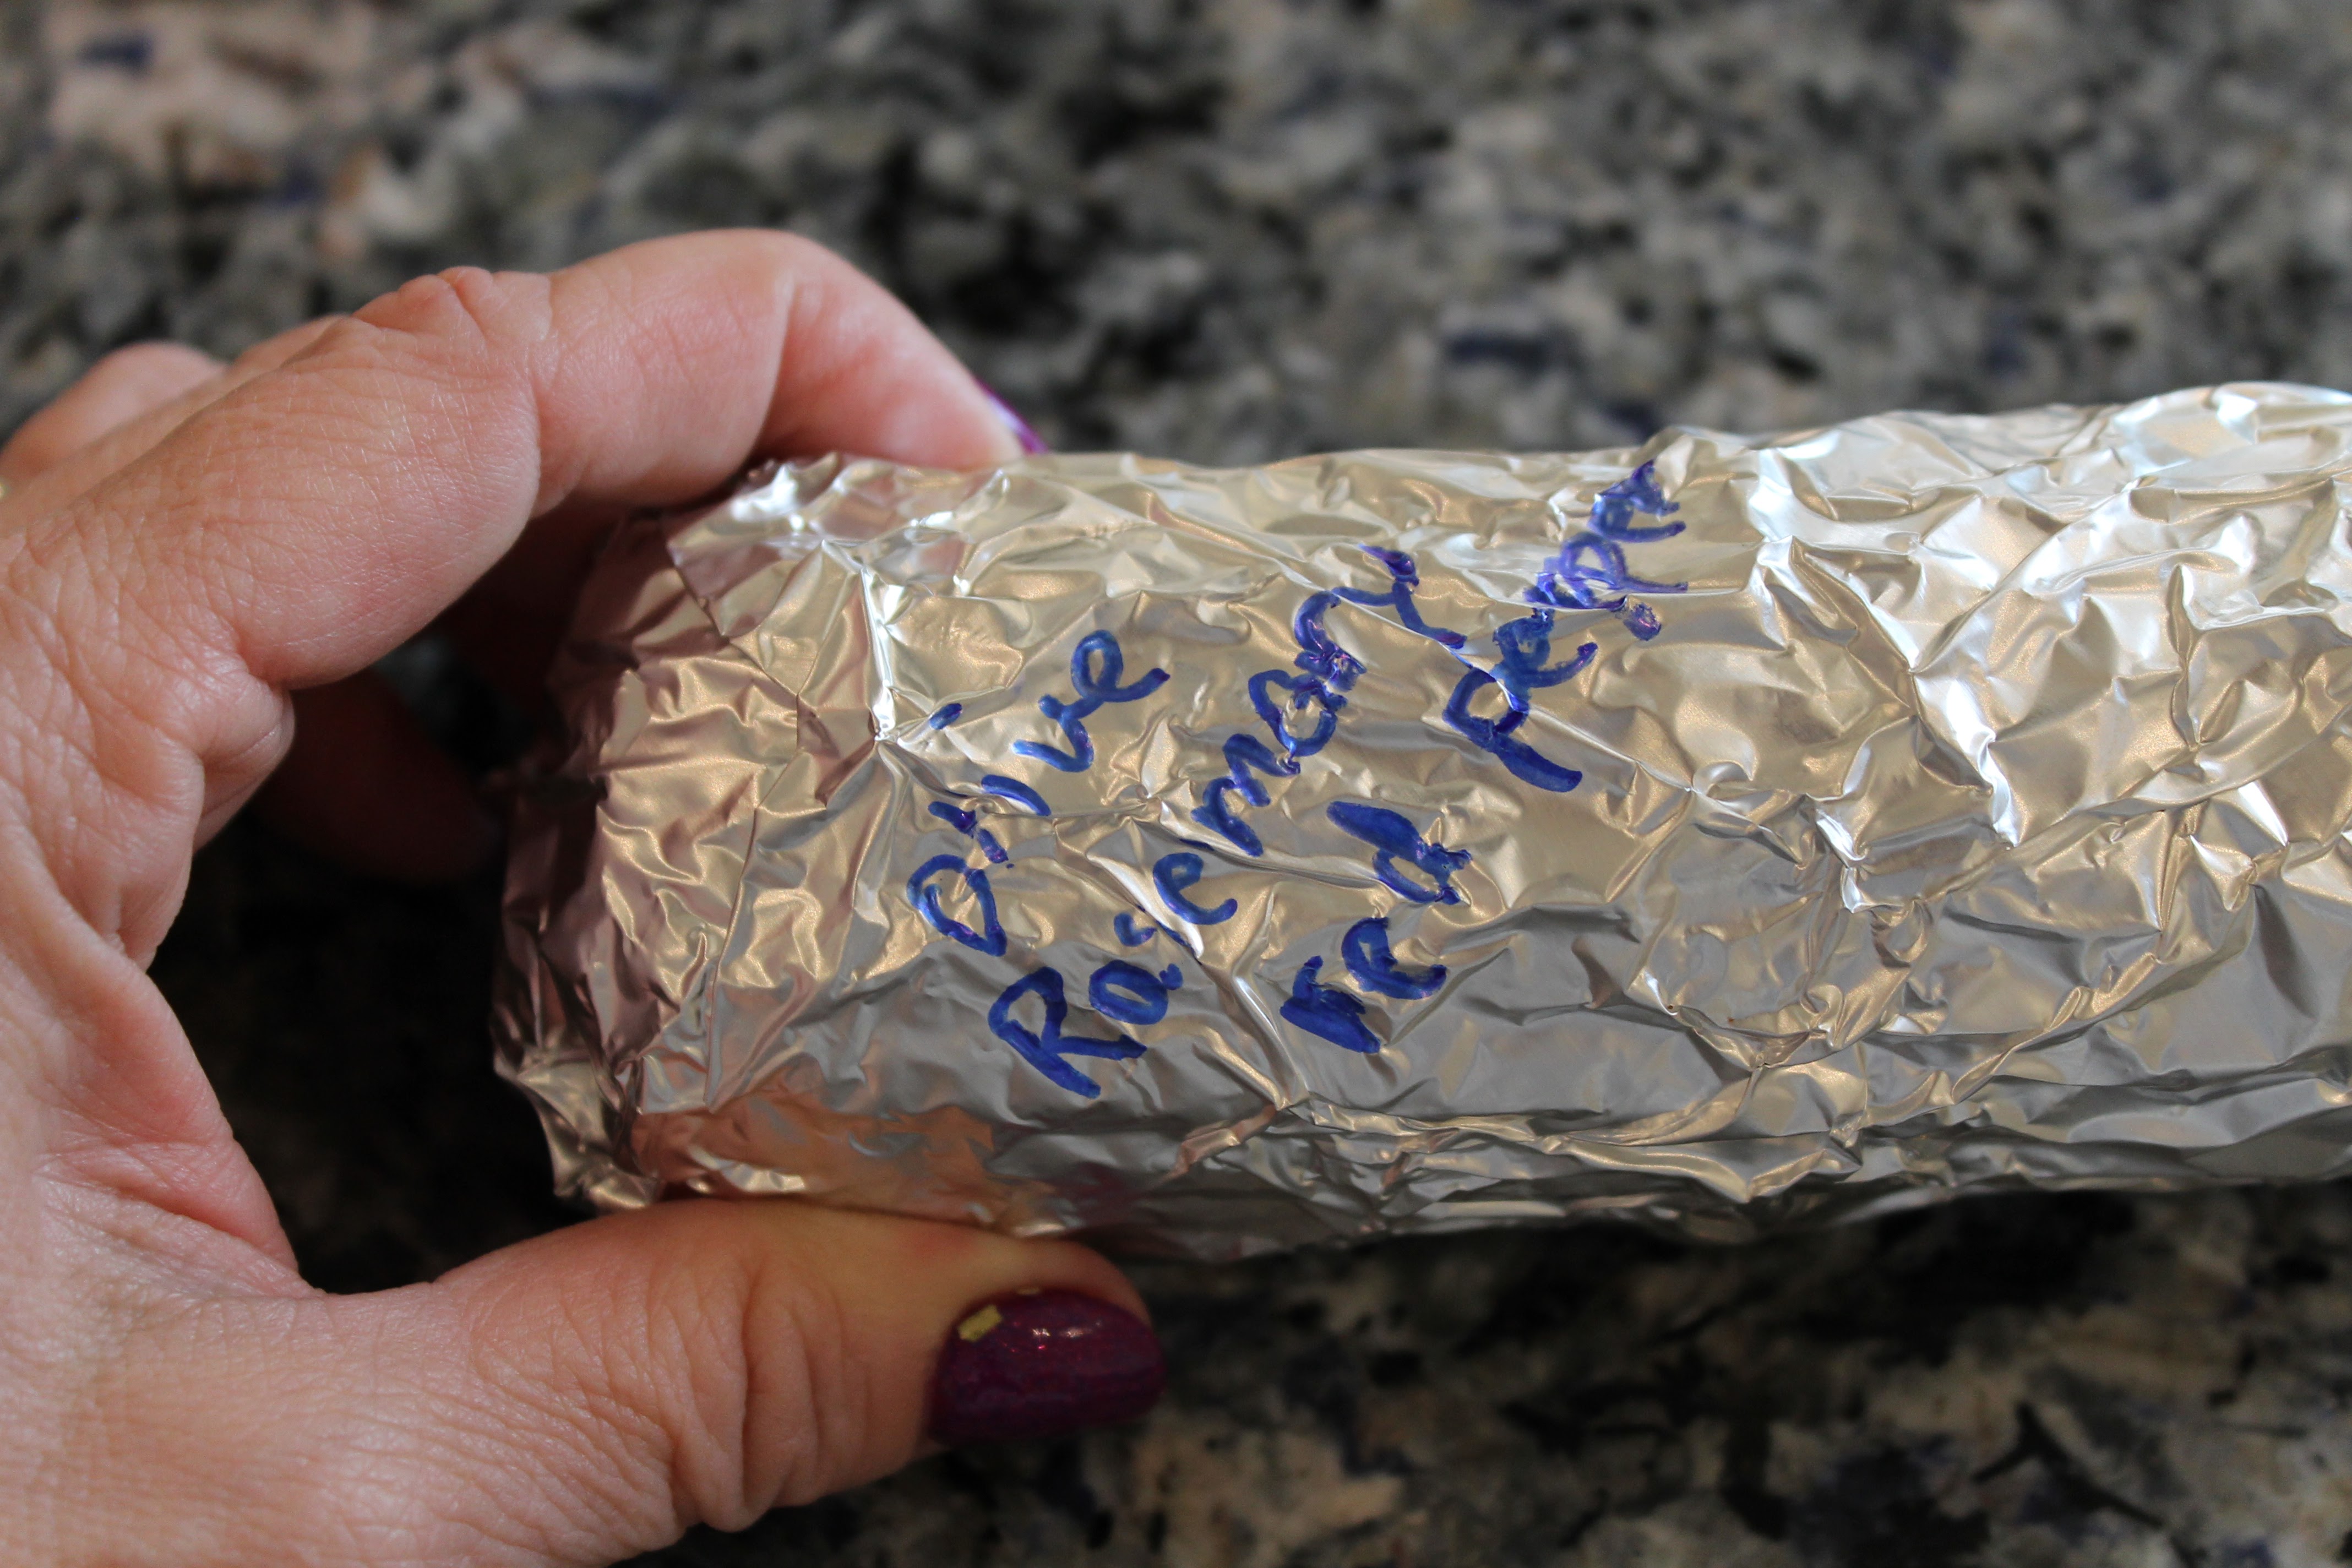 Wrapped corn labeled with the seasonings - rosemary and red pepper.